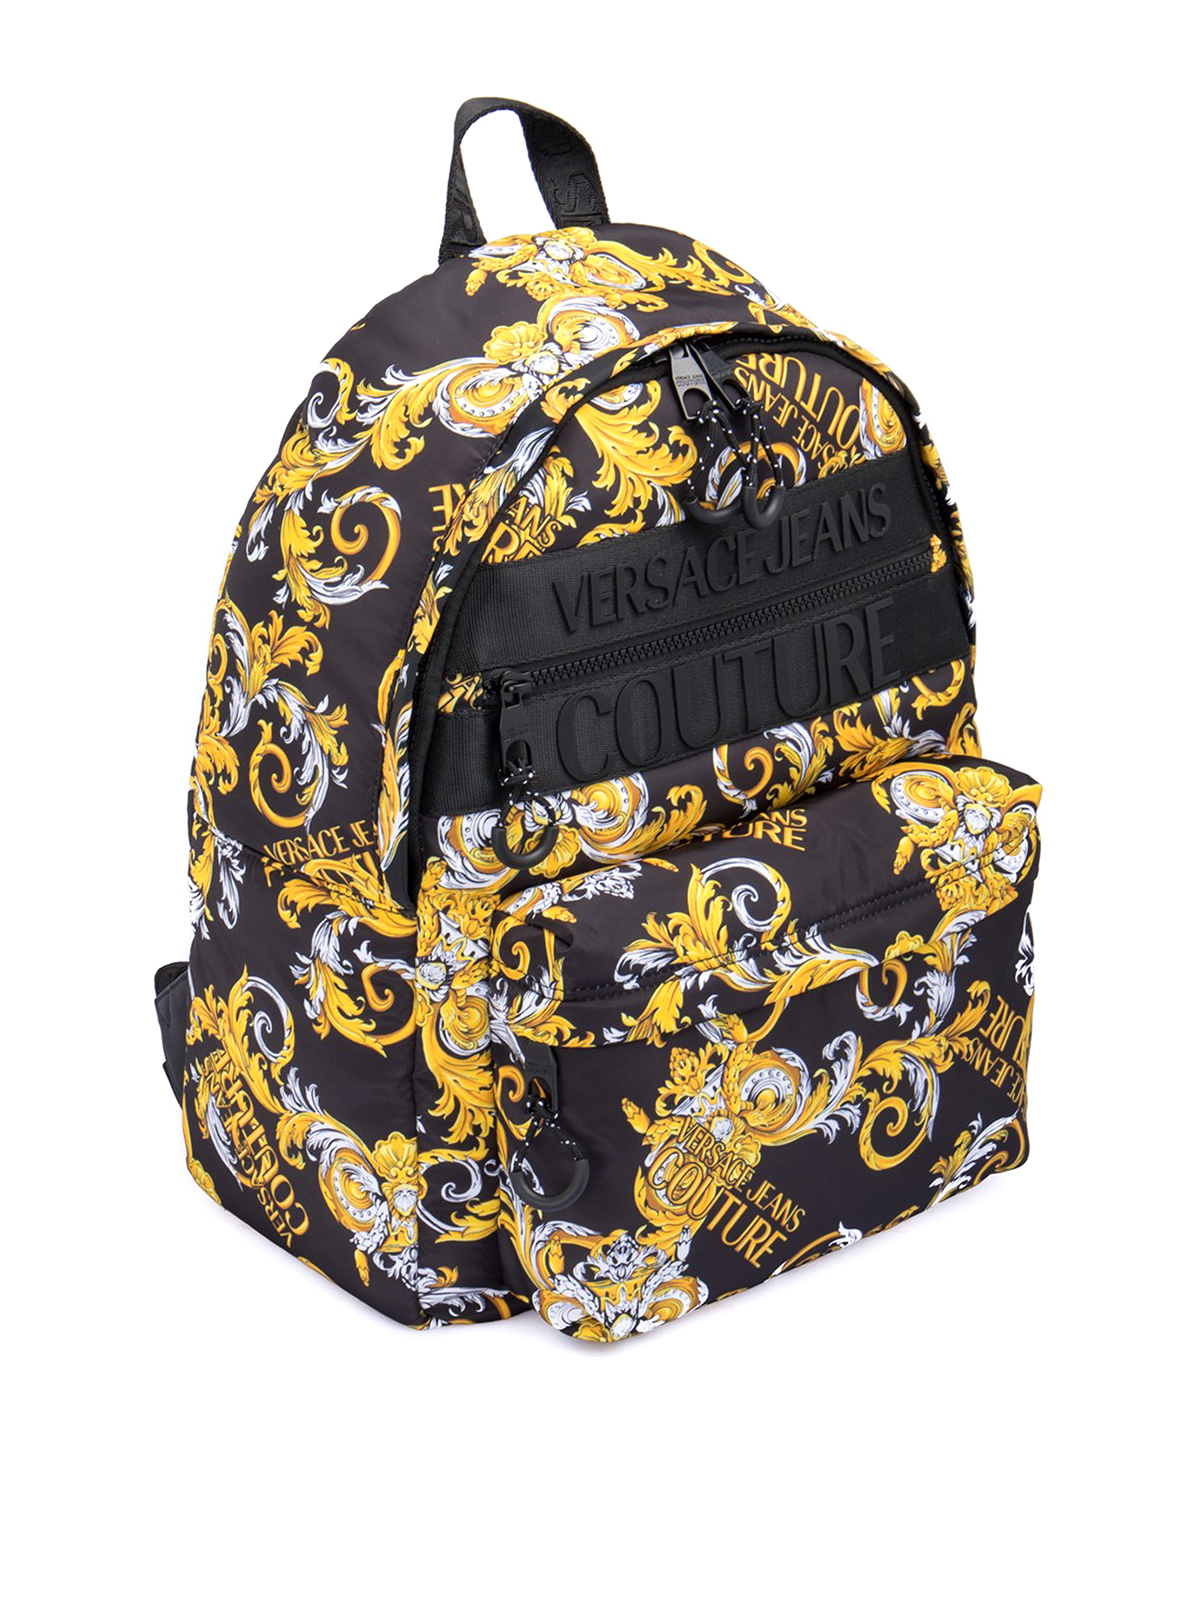 VERSACE JEANS COUTURE リュック バックパック マルチカラー